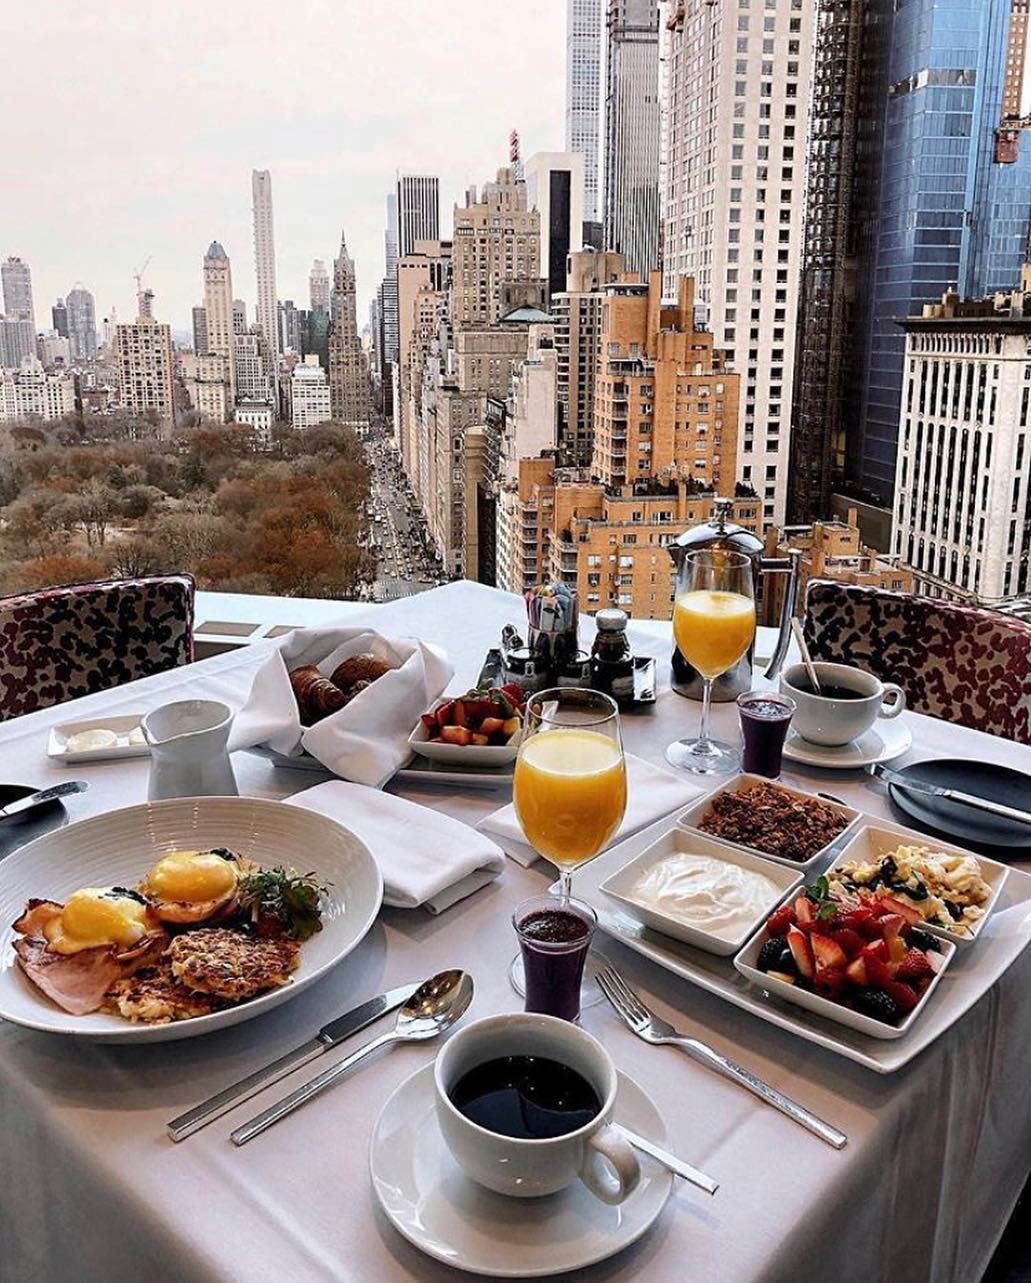 The Best Place for Breakfast in New York